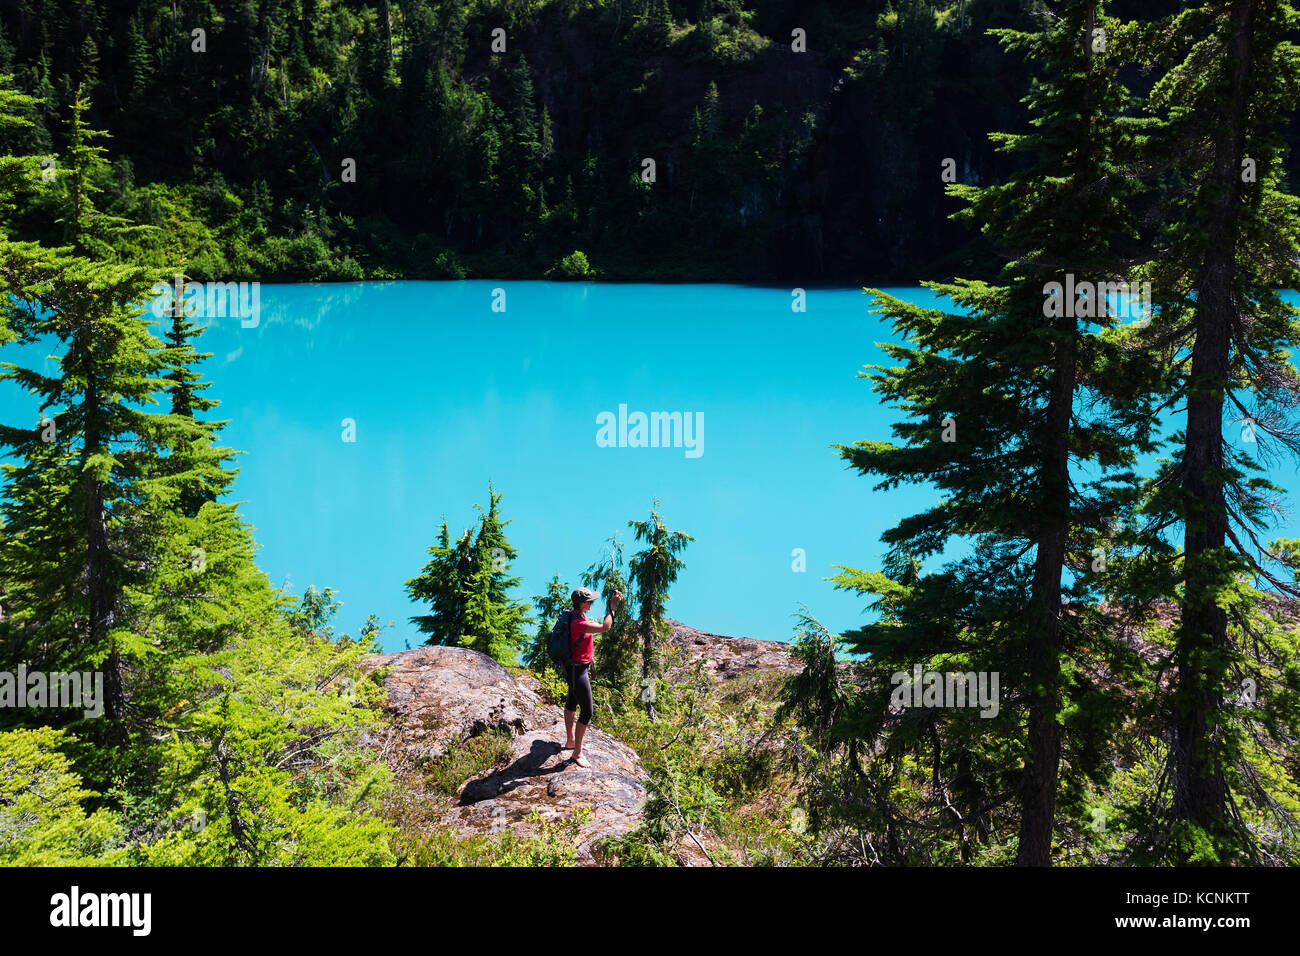 A female hiker stops to take in the view from a rock bluff overlooking Century Sam lake, Strathcona Park, Vancouver Island, British Columbia, Canada Stock Photo